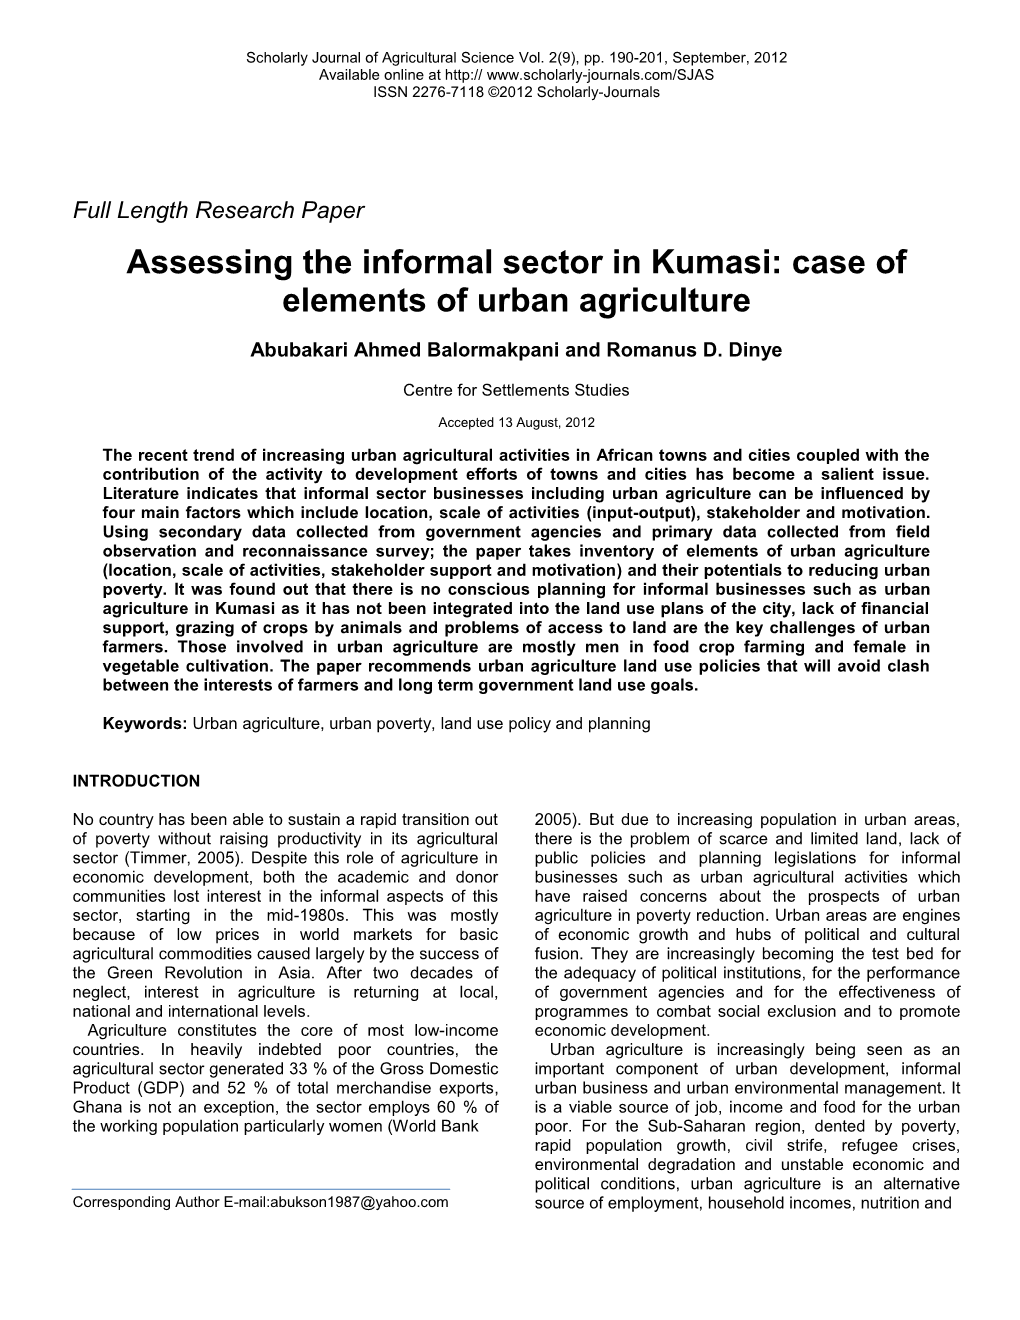 Assessing the Informal Sector in Kumasi: Case of Elements of Urban Agriculture